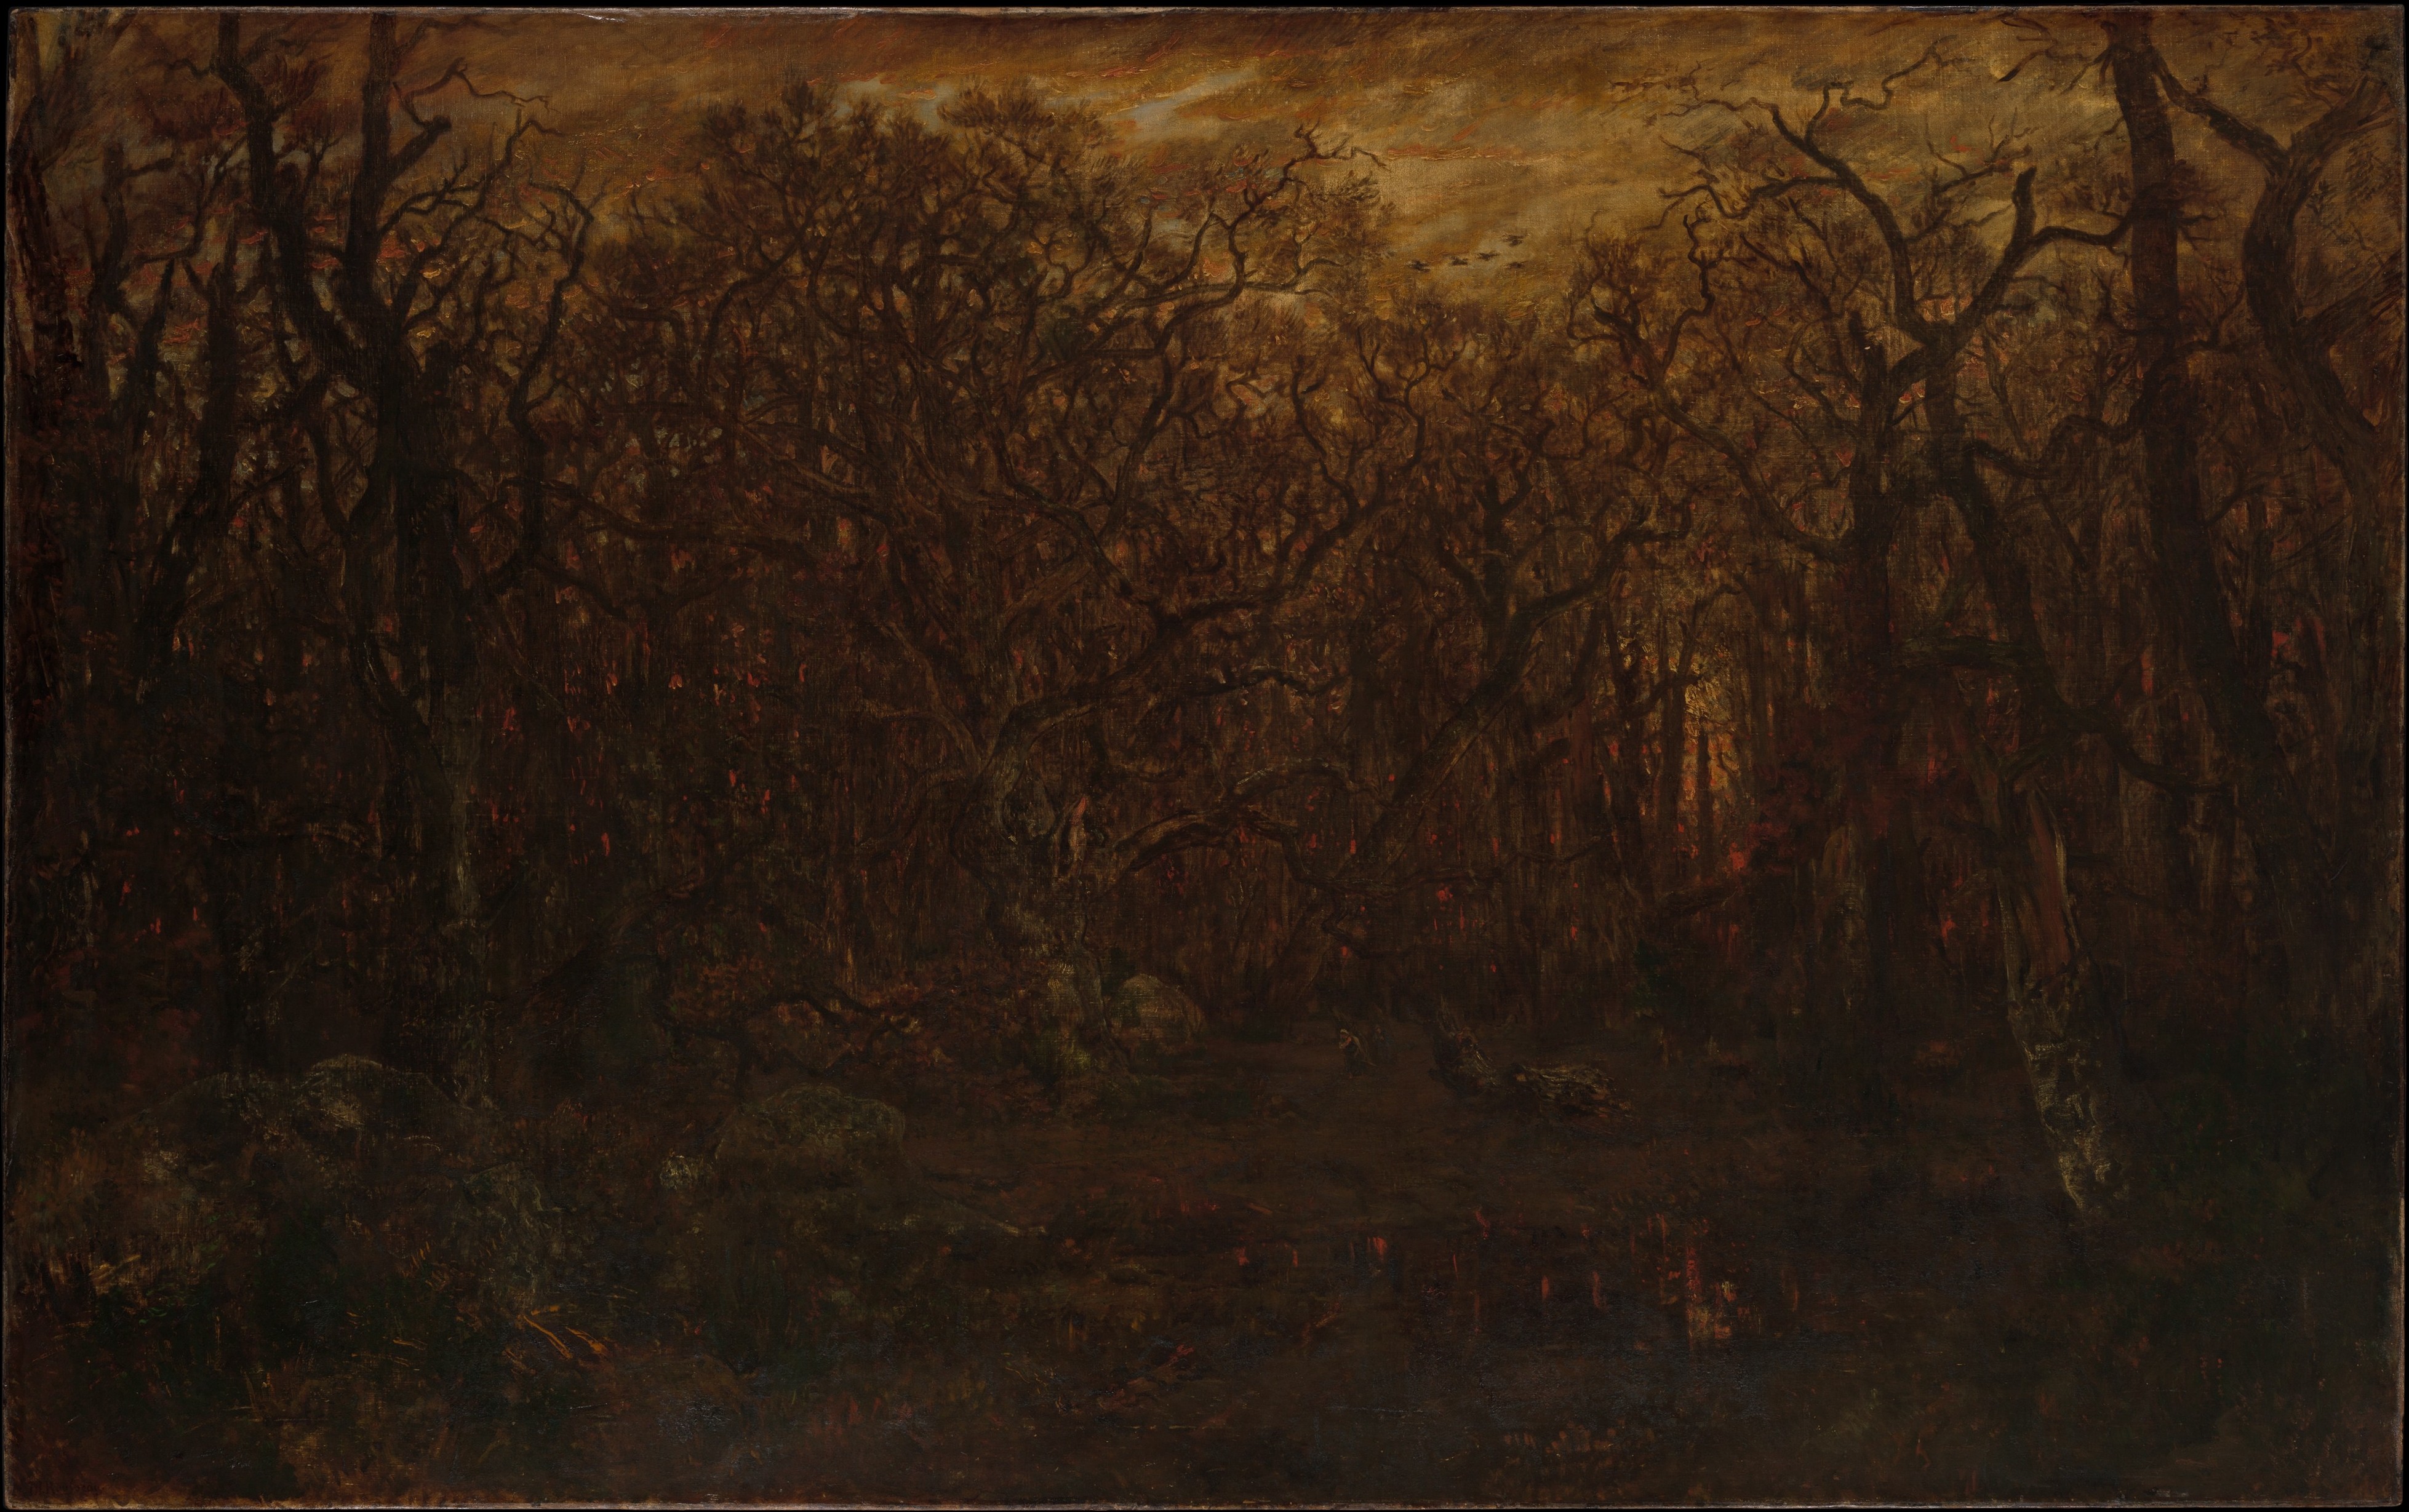 Théodore Rousseau | The Forest in Winter at Sunset | The Metropolitan Museum of Art